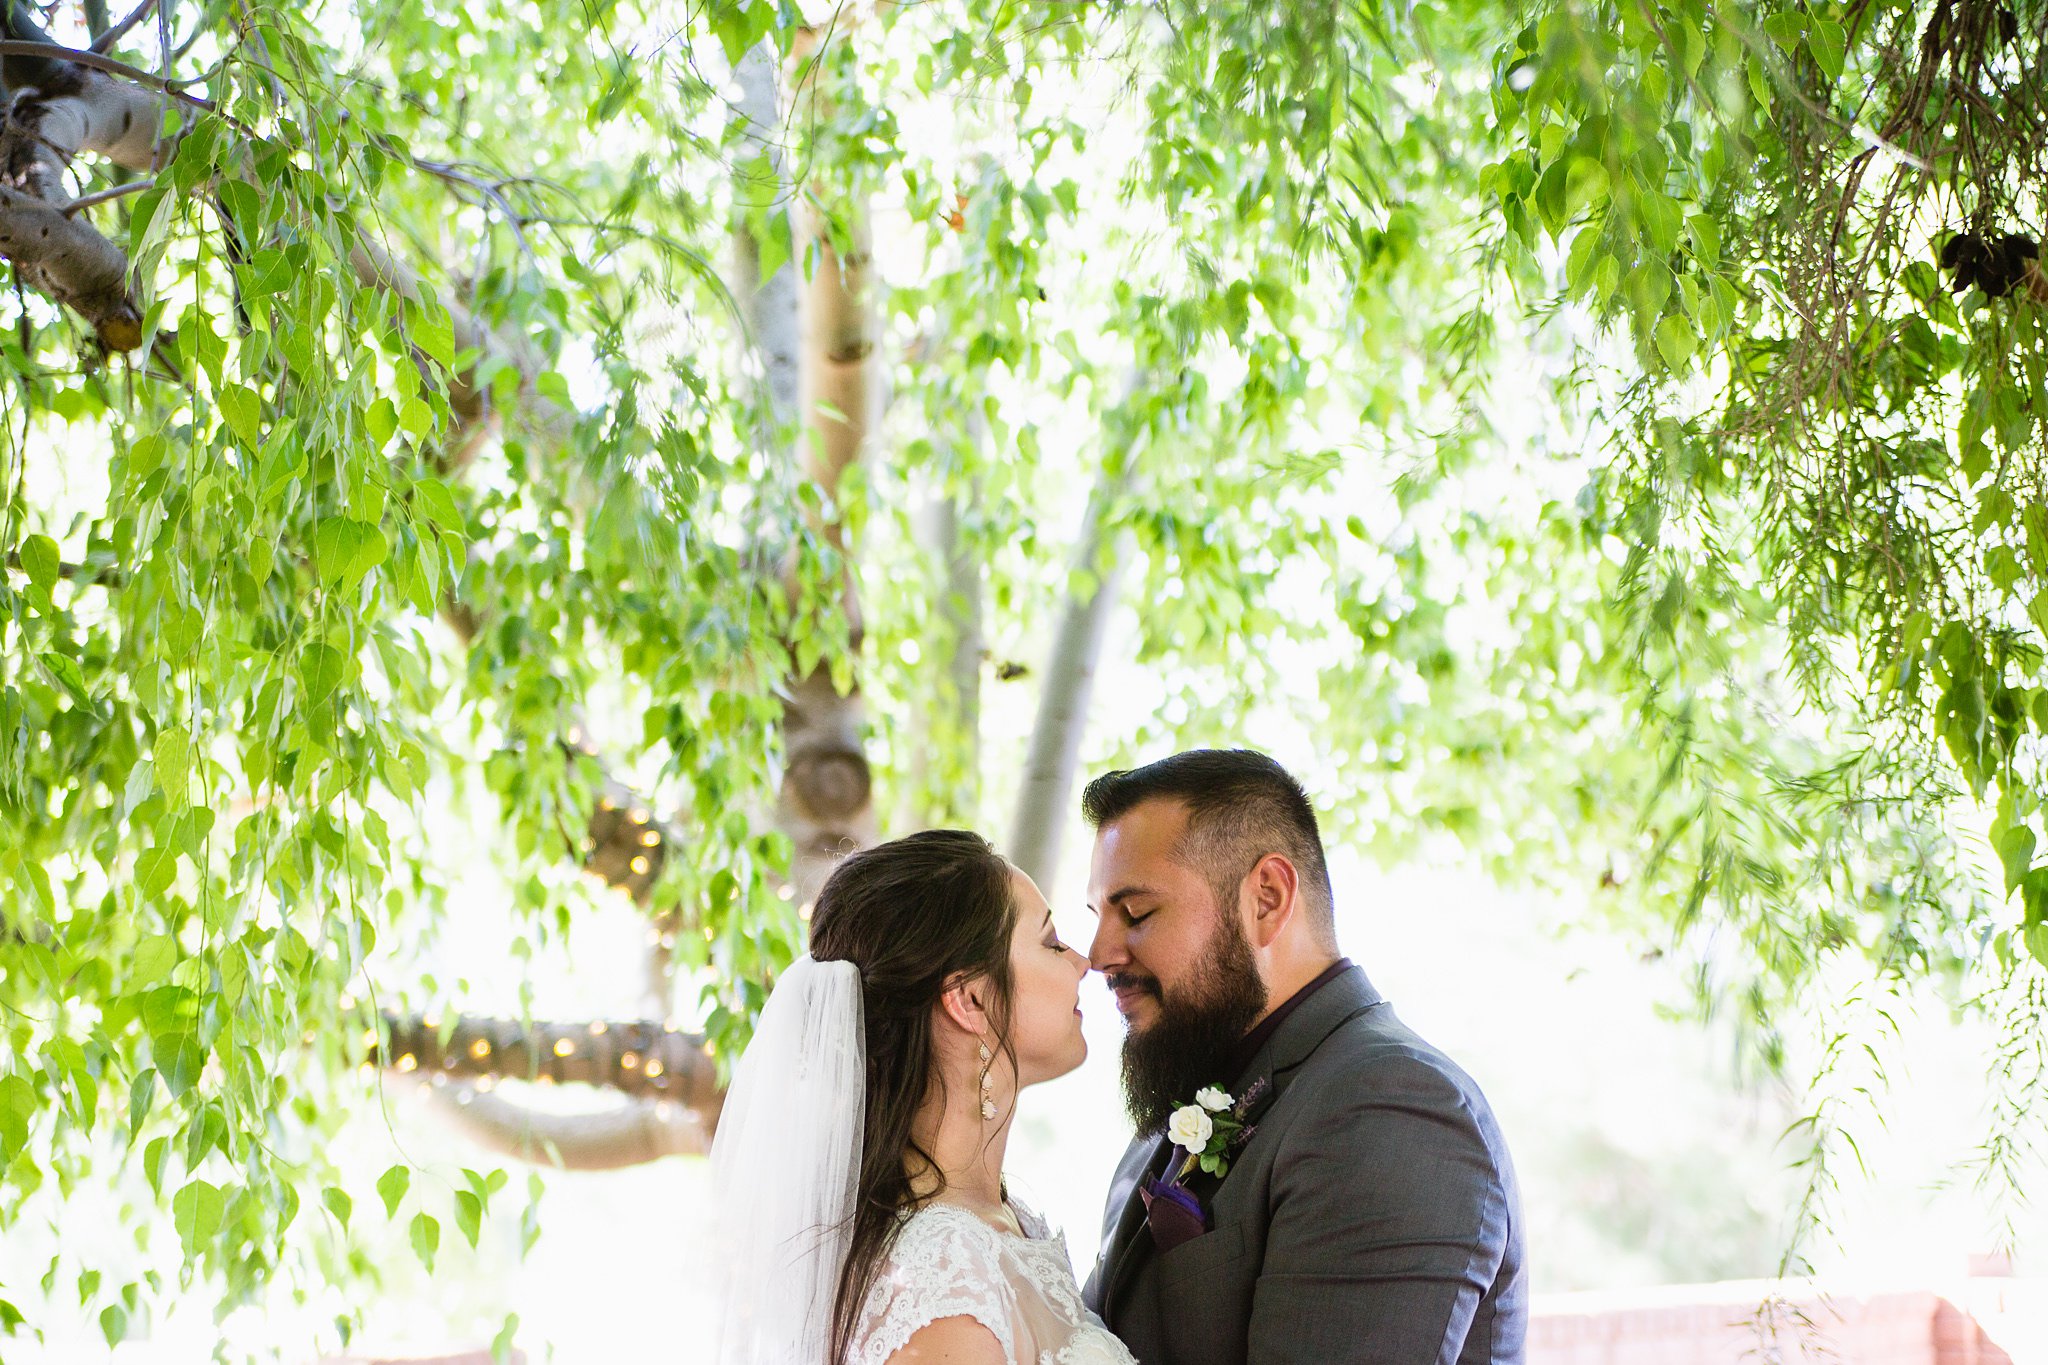 Bride and groom share an intimate moment in front of trees at wedding at Schnepf Farm's Farmhouse by Arizona wedding photographers PMA Photography.